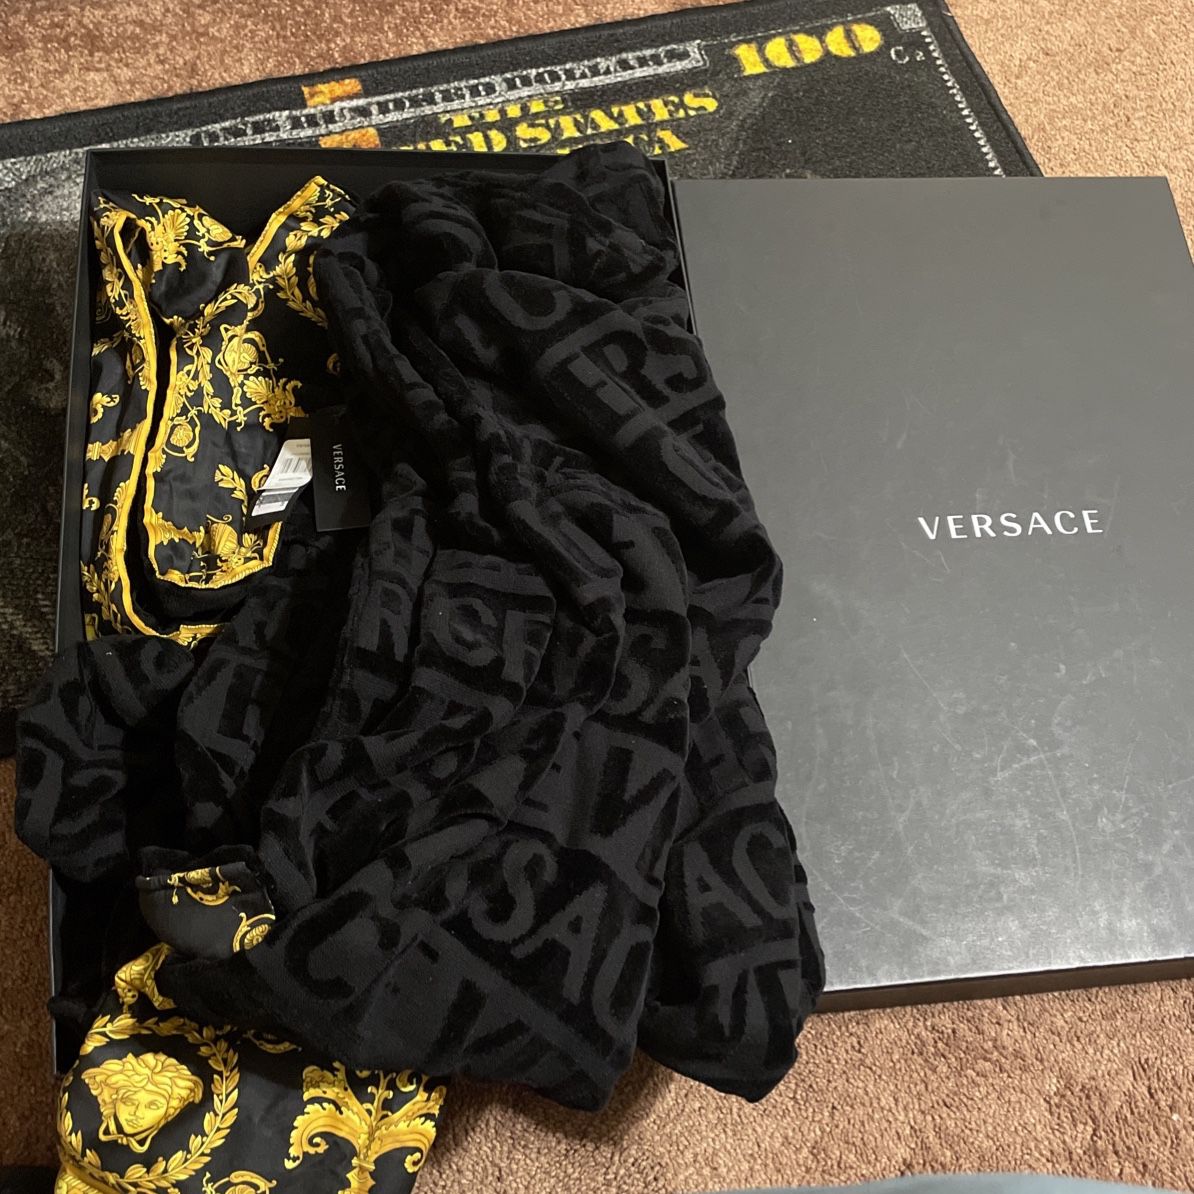 Versace Robe Brand New Size XL Authentic 